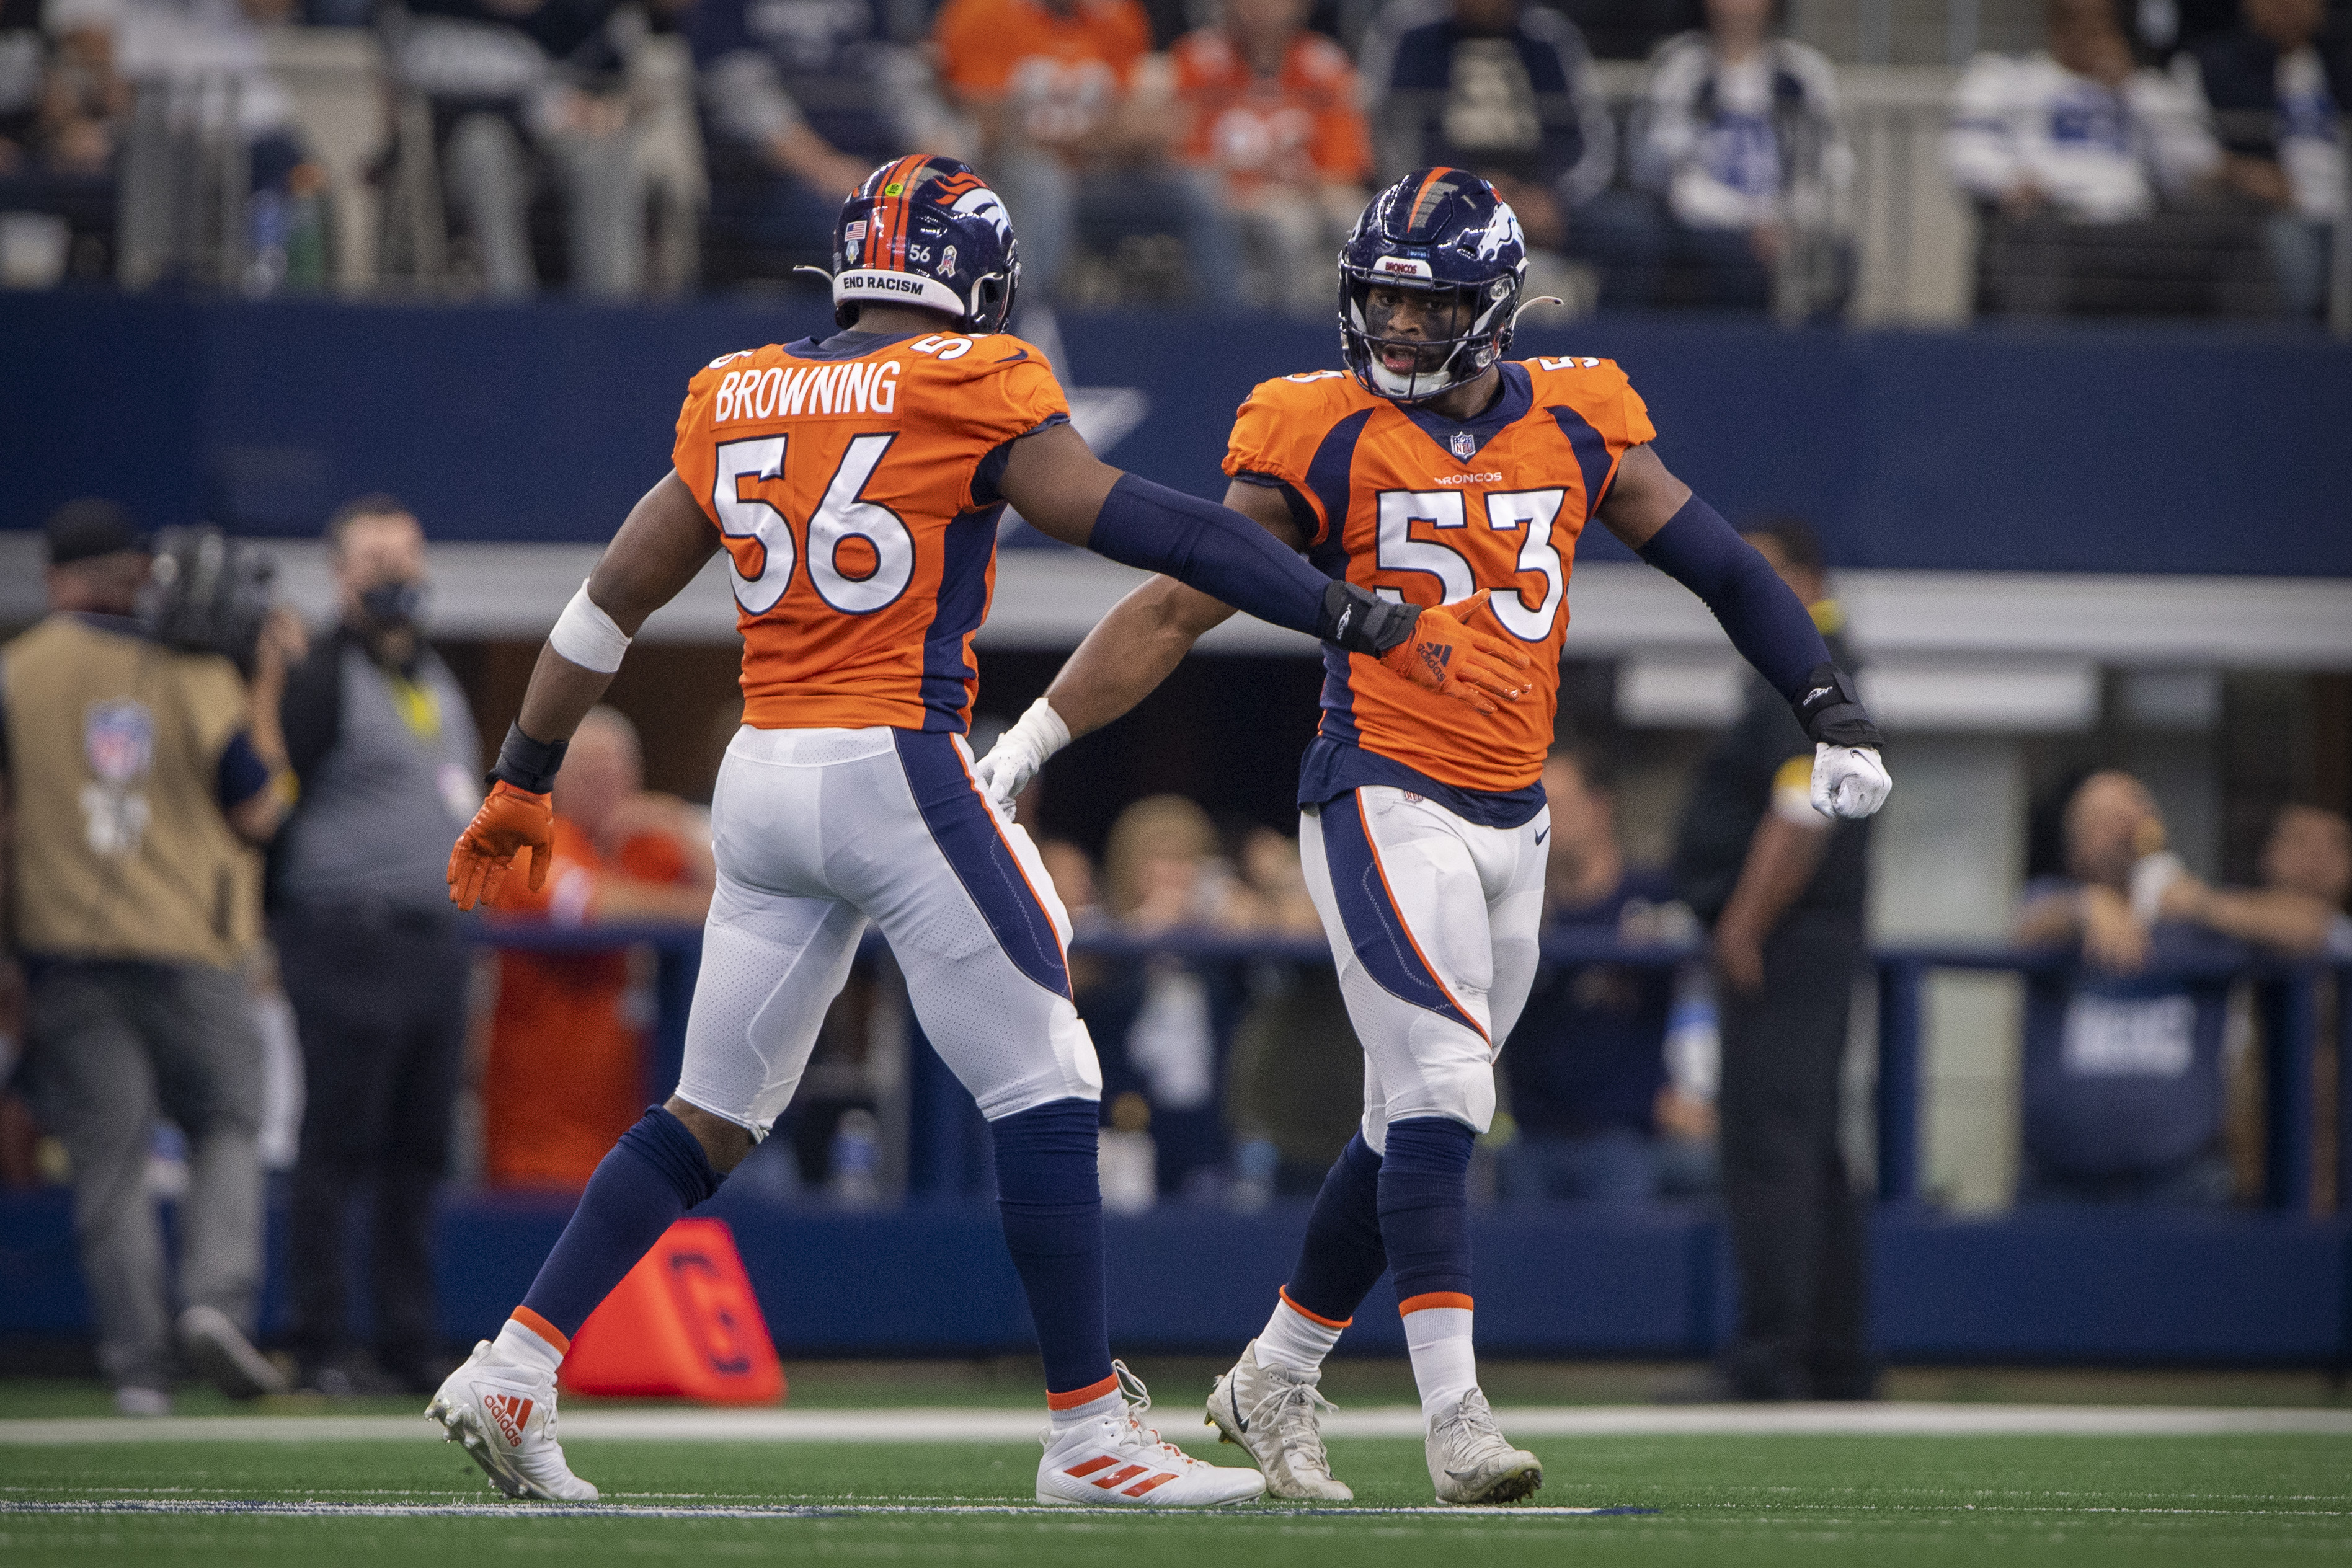 Denver Broncos linebacker Baron Browning (56) and linebacker Jonathon Cooper (53) celebrate a sack against the Dallas Cowboys during the second quarter at AT&T Stadium.